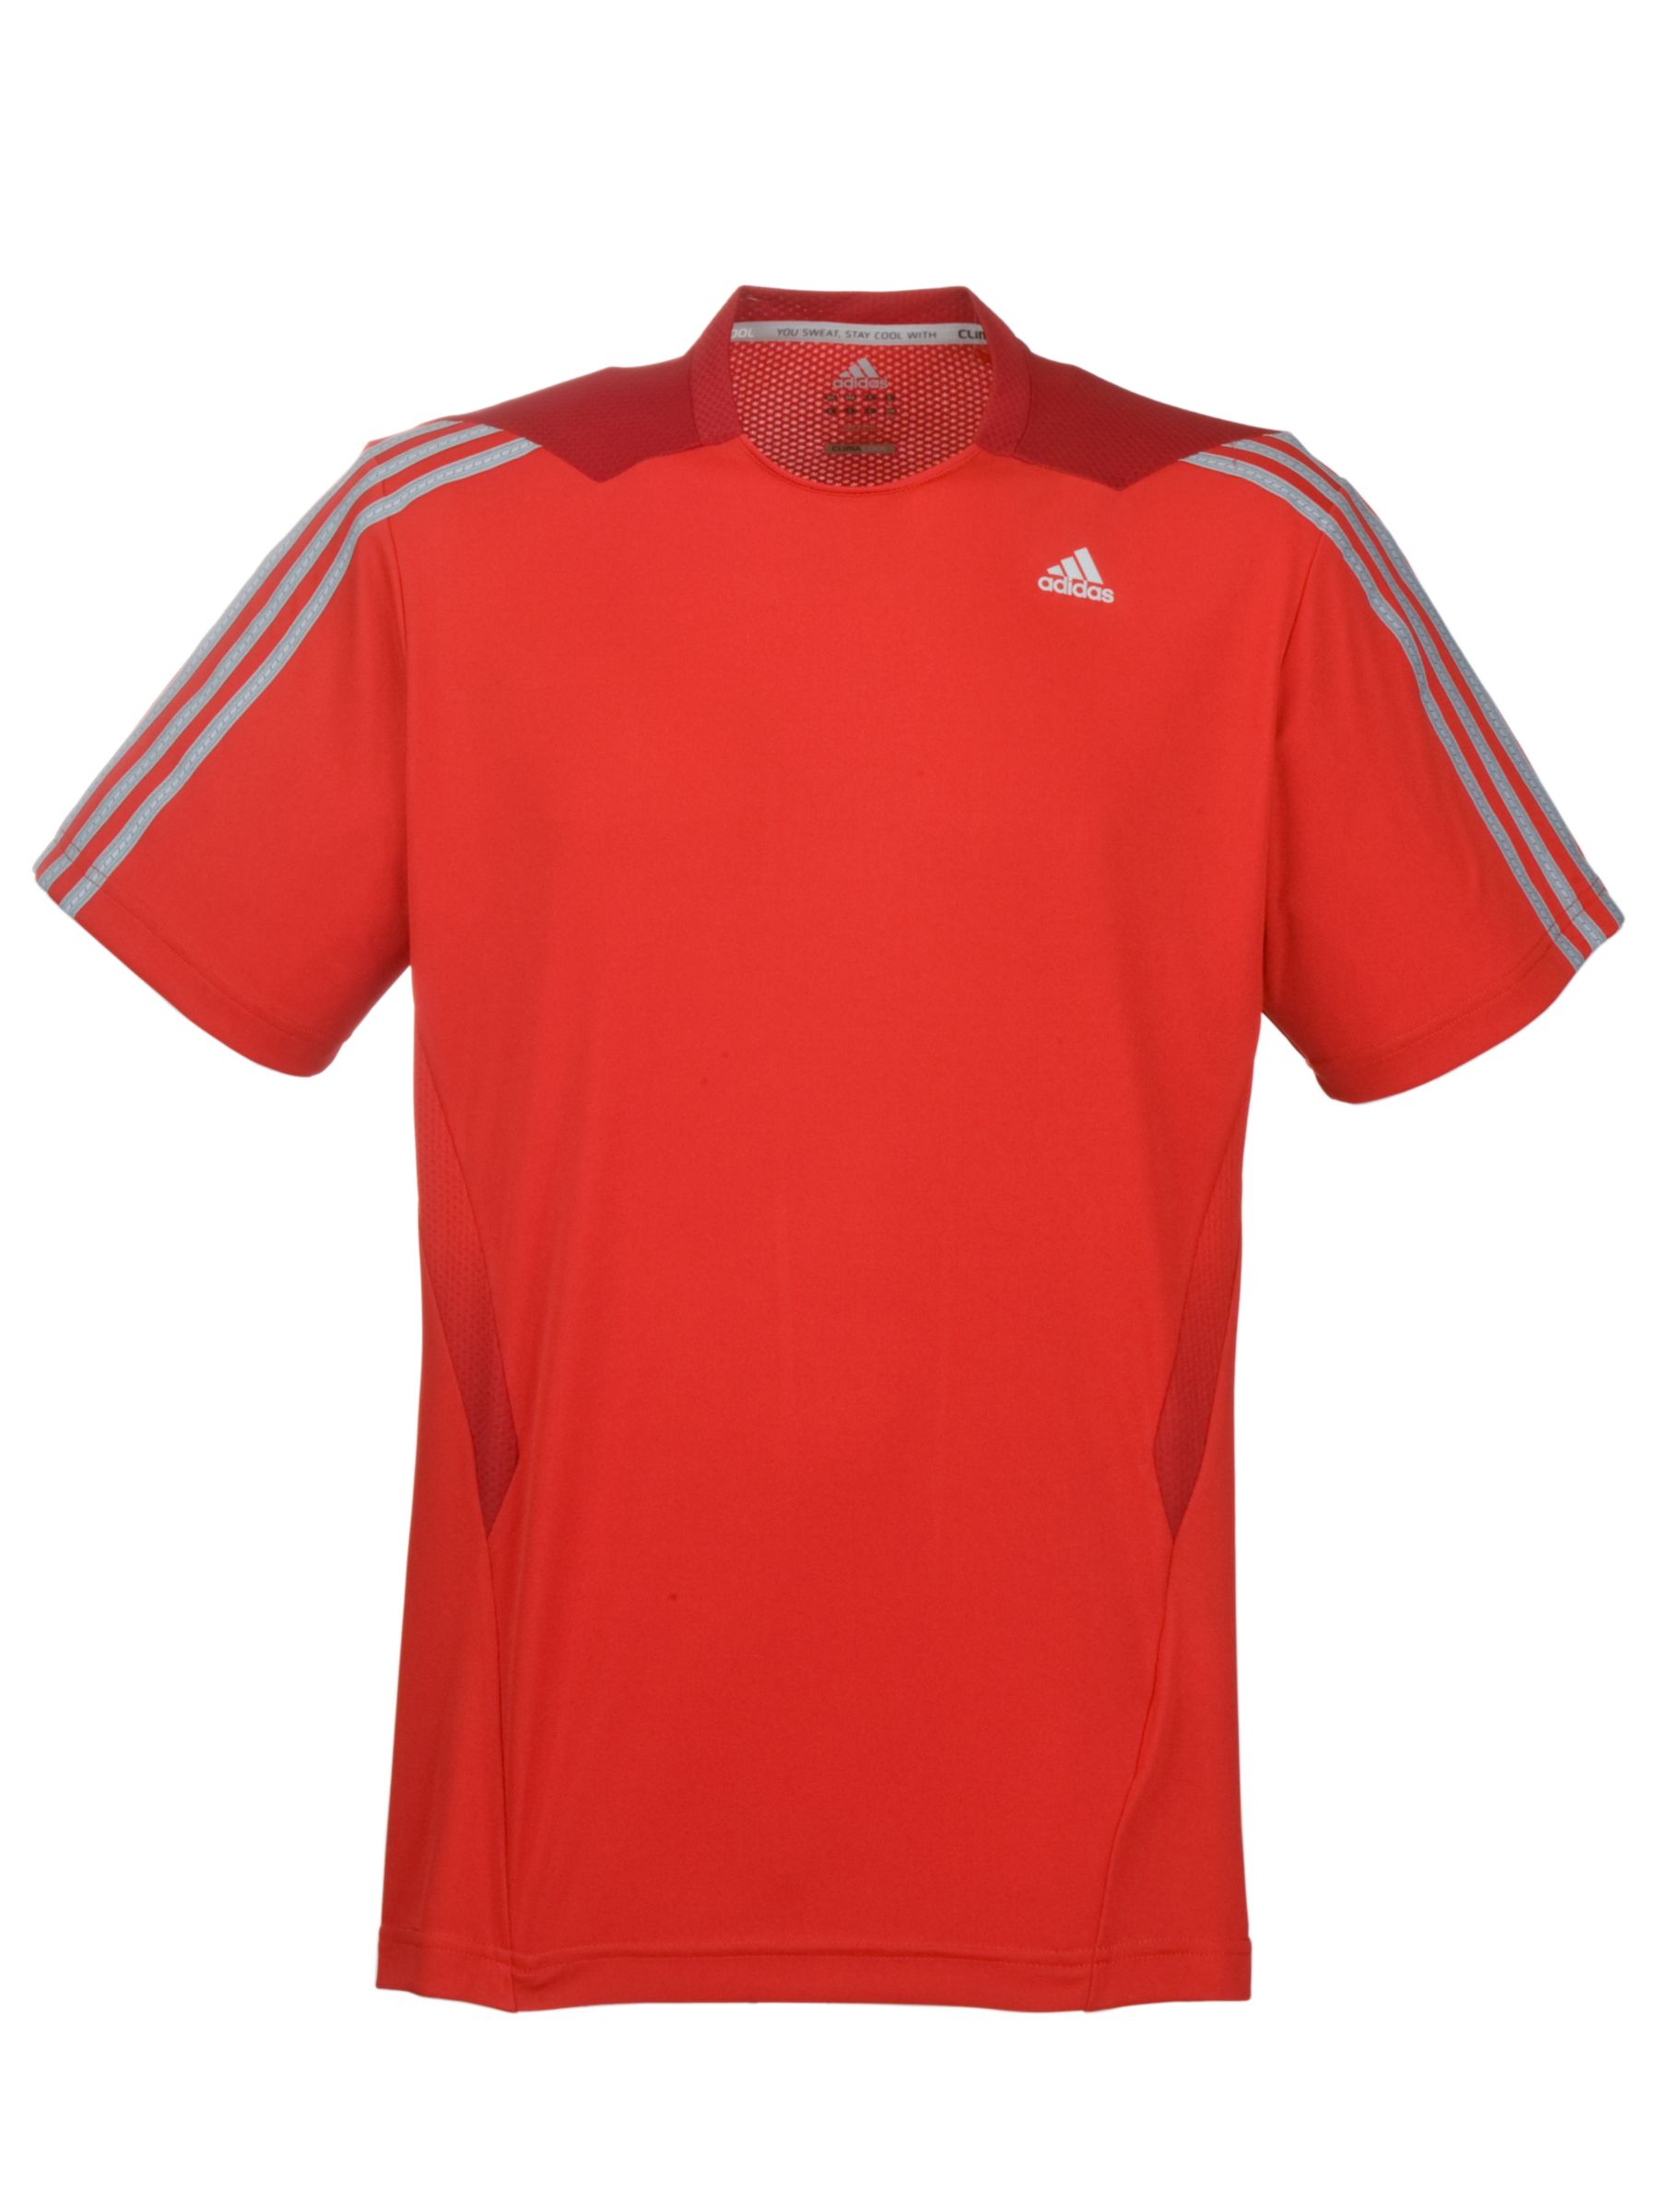 Clima365 T-Shirt, Red/Strong red